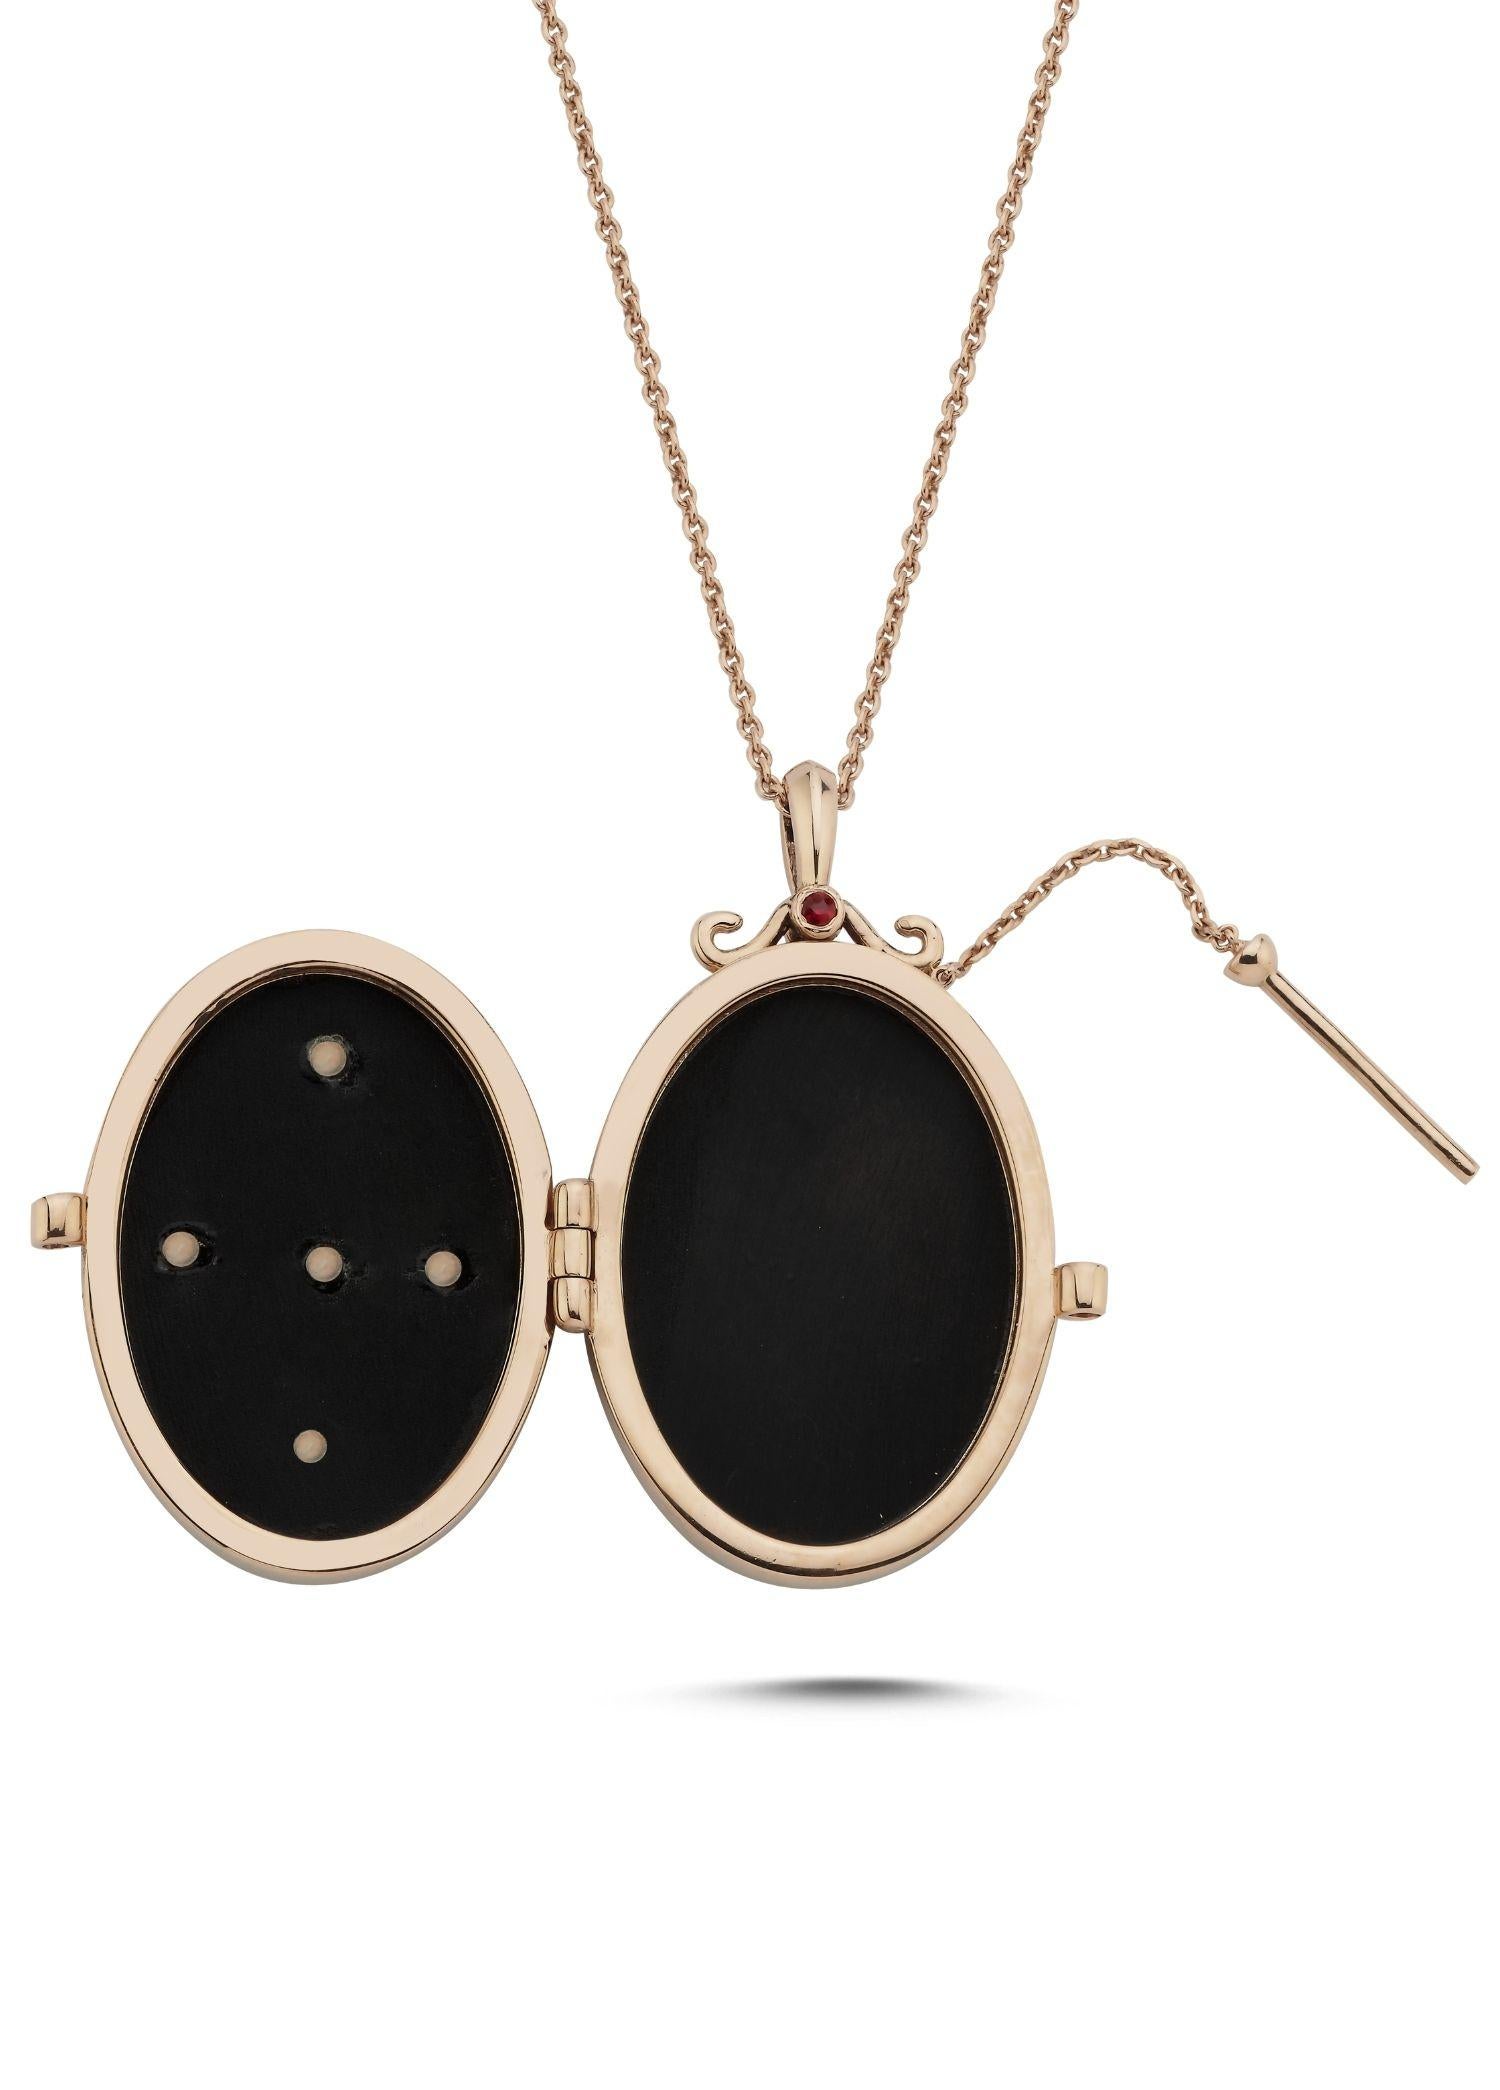 Melie Jewelry Golden Compass Locket Necklace

14K Rose Gold, 0.02 ct White Diamond/ G-VS, 0.09 ct Blue Sapphire, 0.16 ct Ruby, 0.07 ct Emerald, Onyx.
Locket Necklace comes with a gold 46 cm chain.

The Story Behind
The Golden Compass Locket is